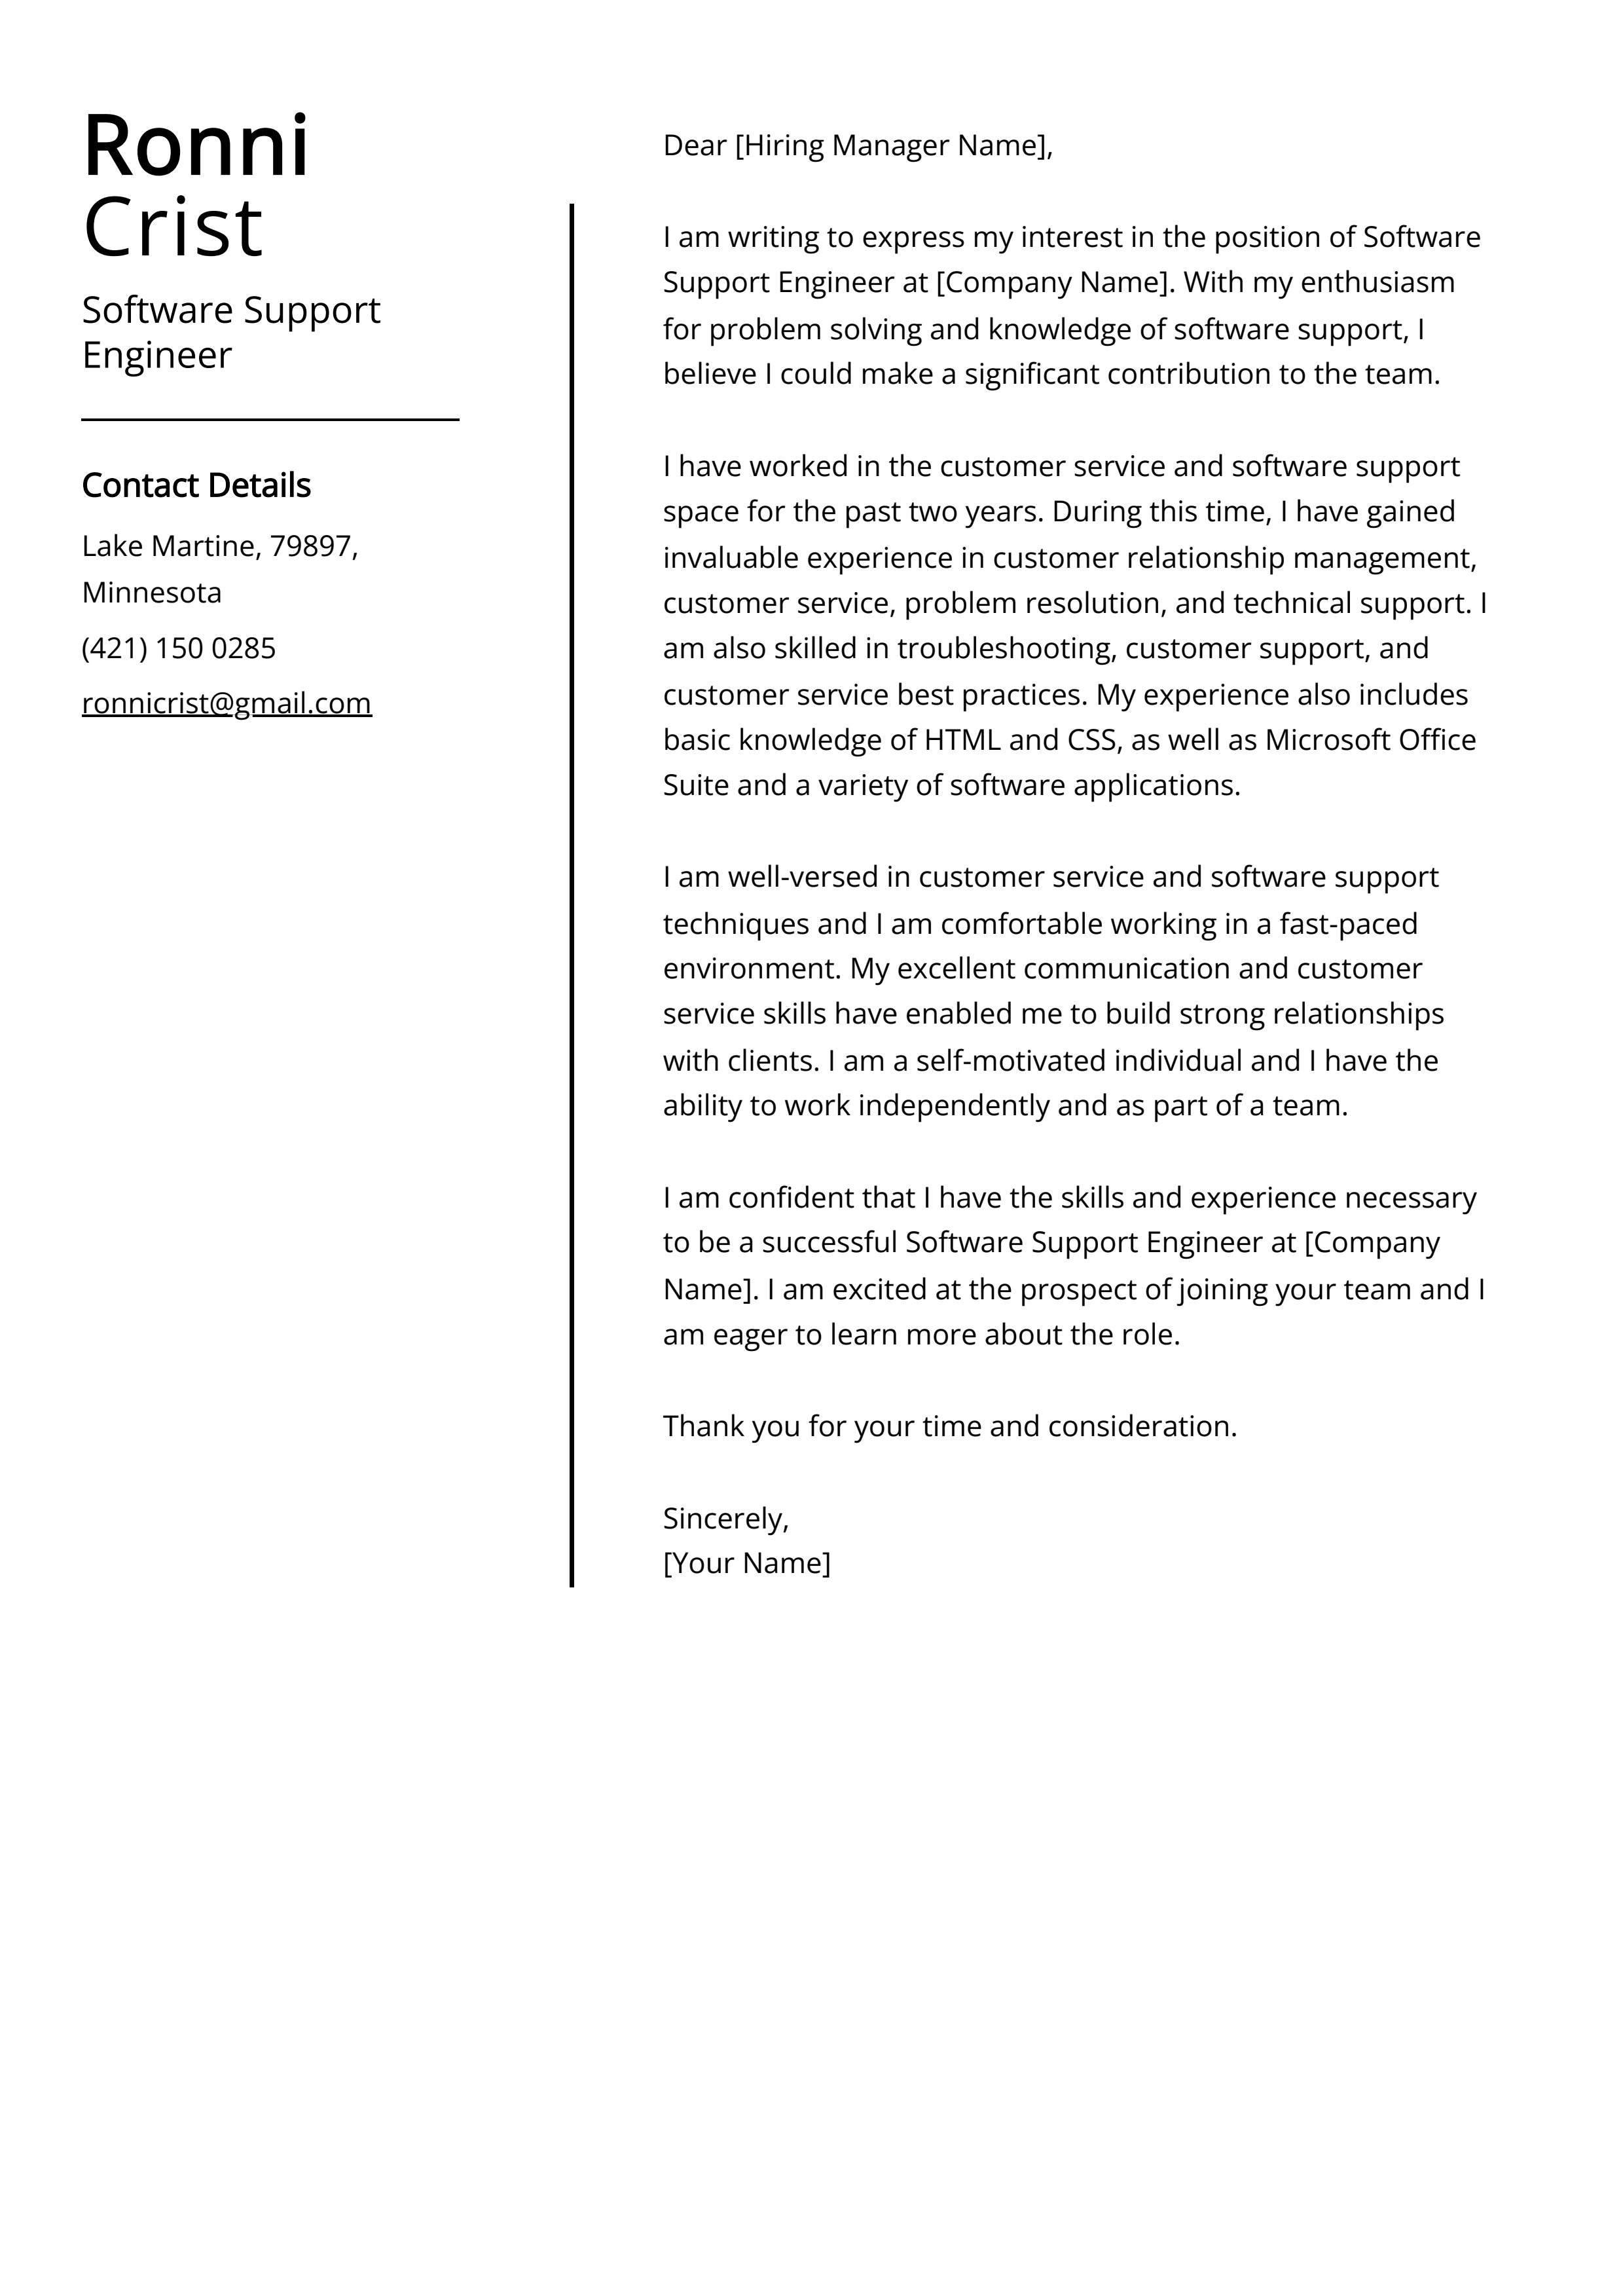 Software Support Engineer Cover Letter Example